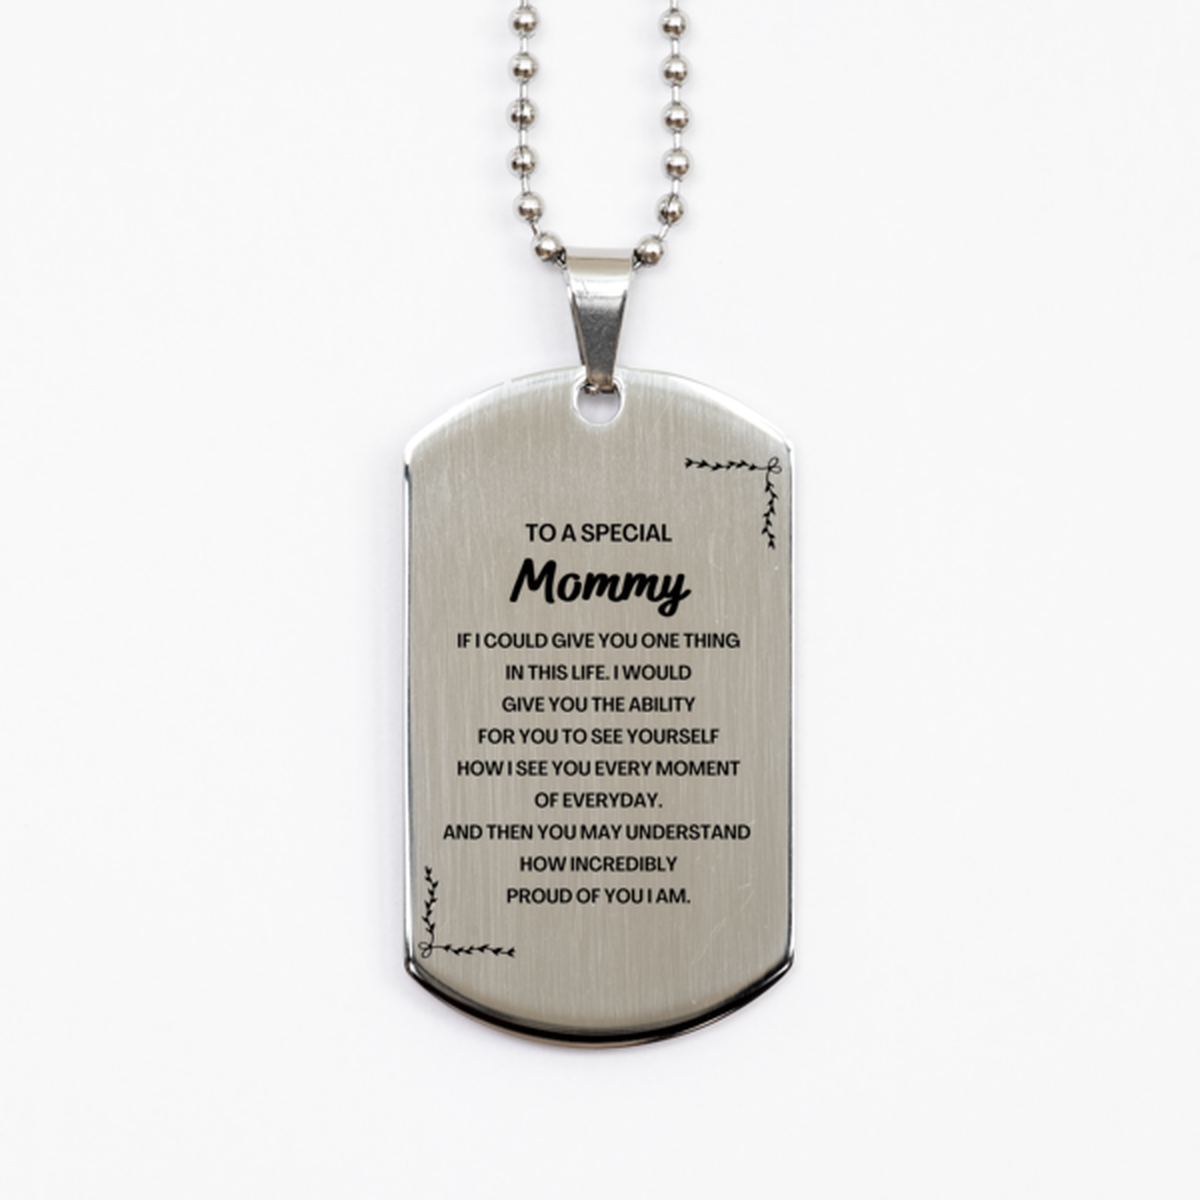 To My Mommy Silver Dog Tag, Gifts For Mommy Engraved, Inspirational Gifts for Christmas Birthday, Epic Gifts for Mommy To A Special Mommy how incredibly proud of you I am